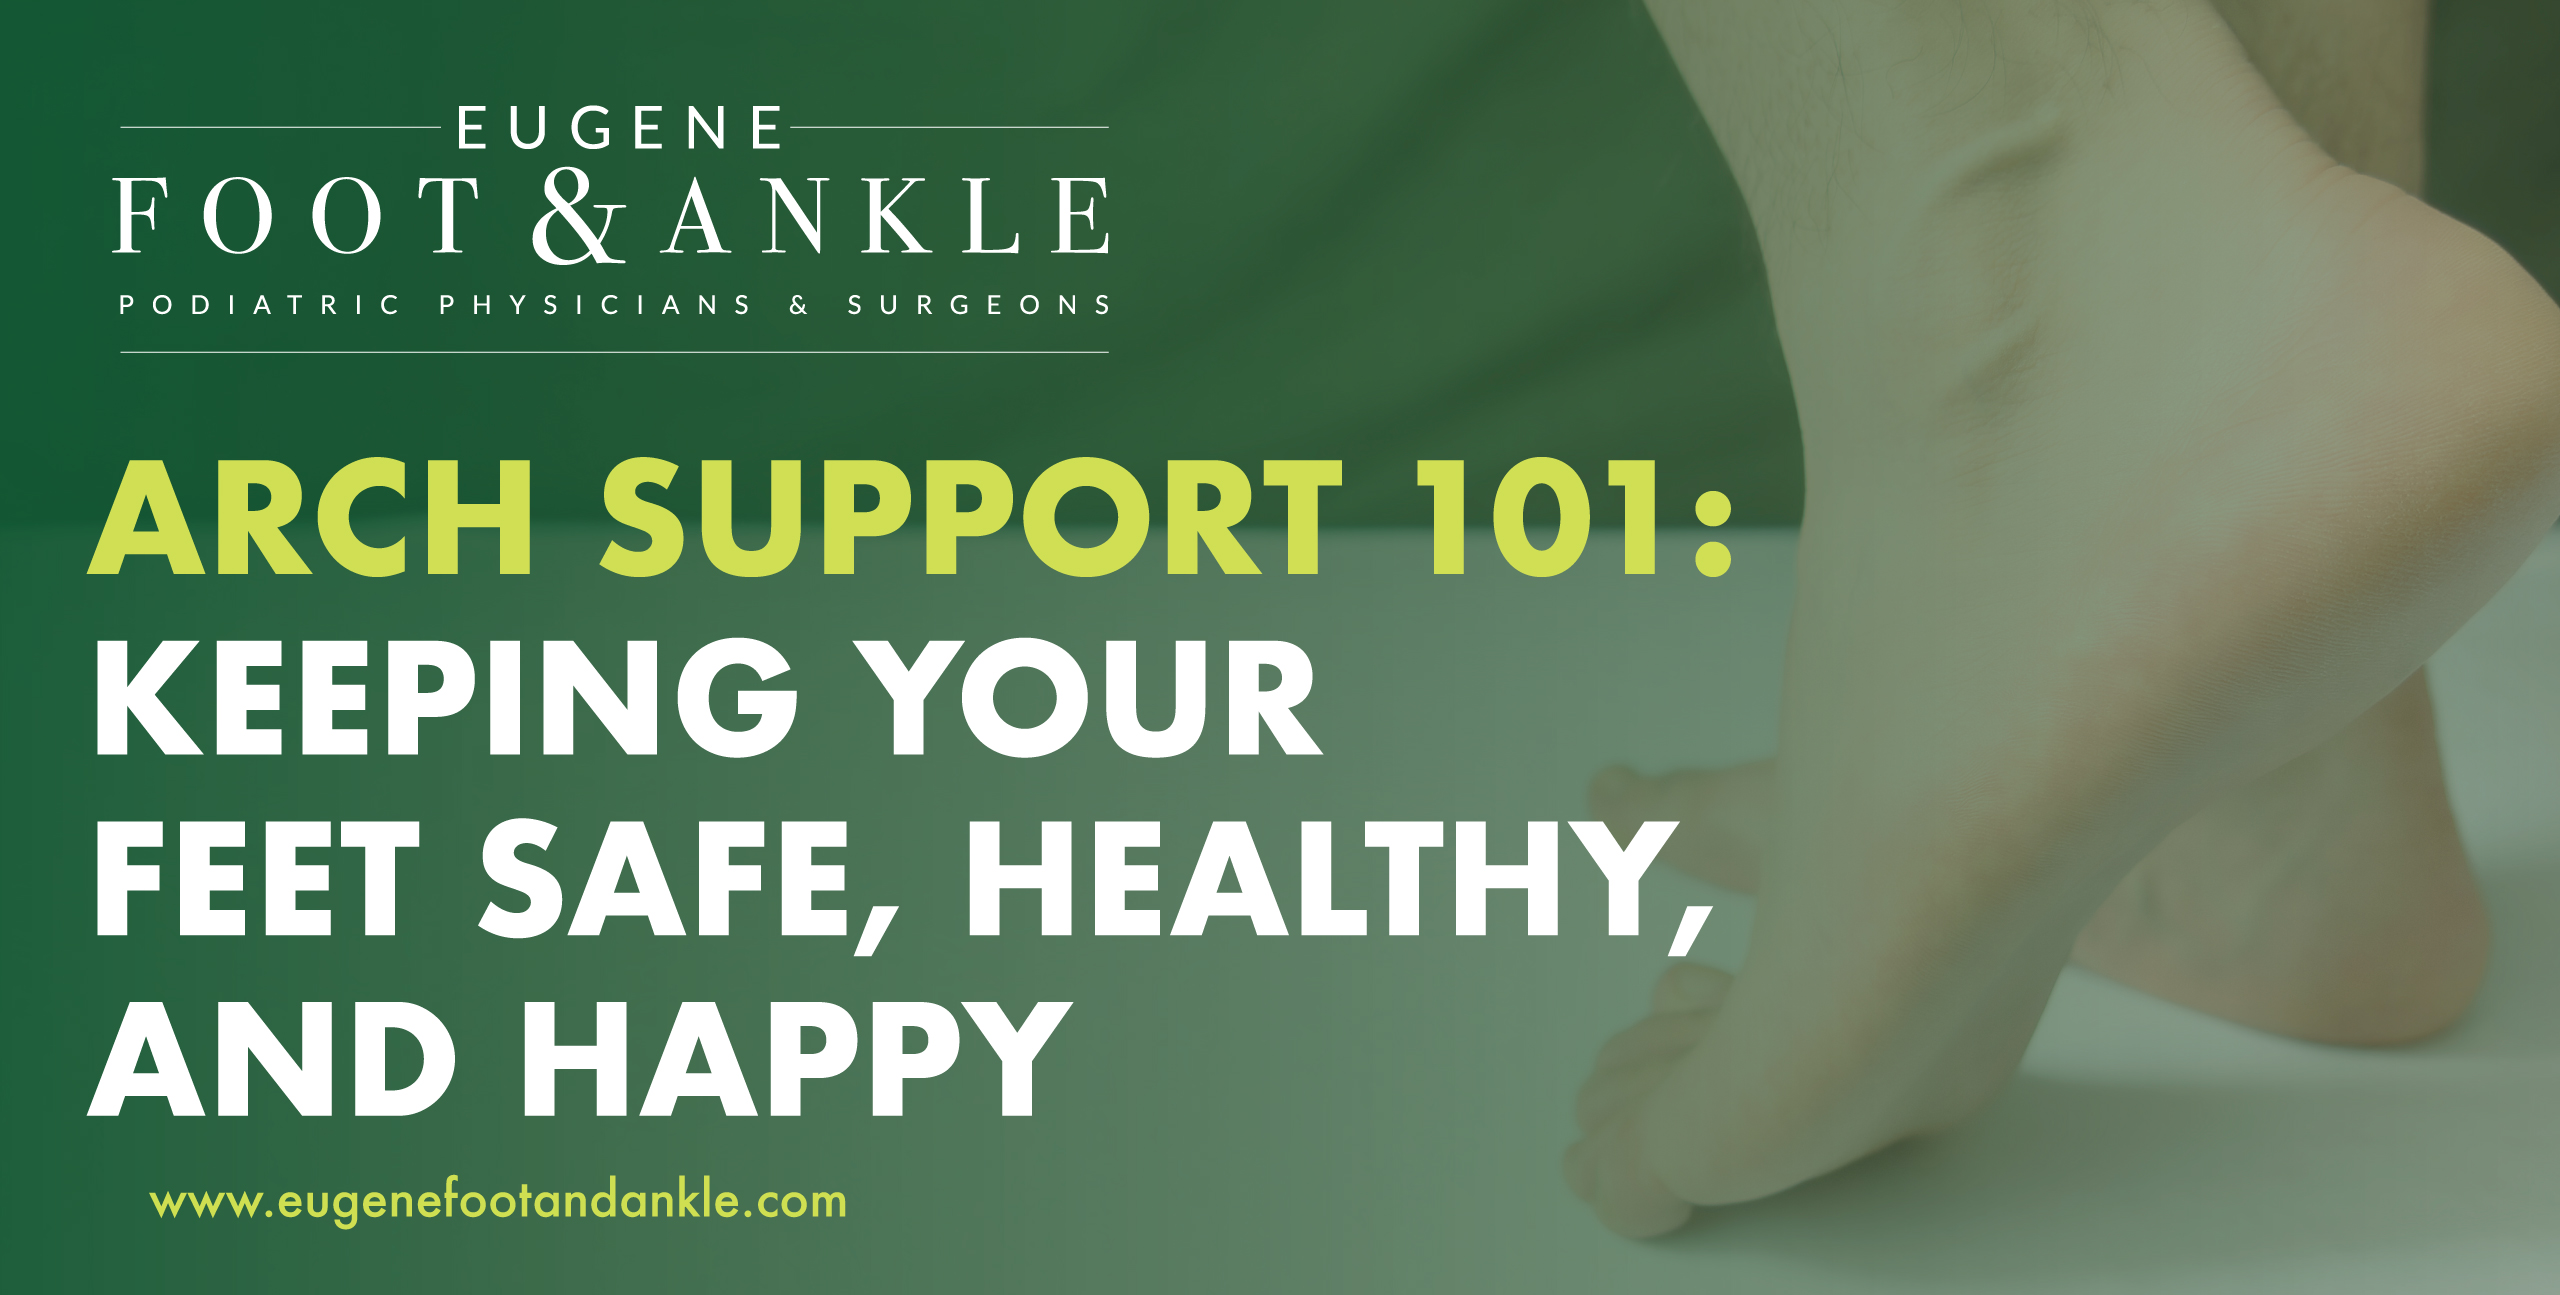 Arch Support 101 | Keeping Feet Healthy | Eugene Foot & Ankle